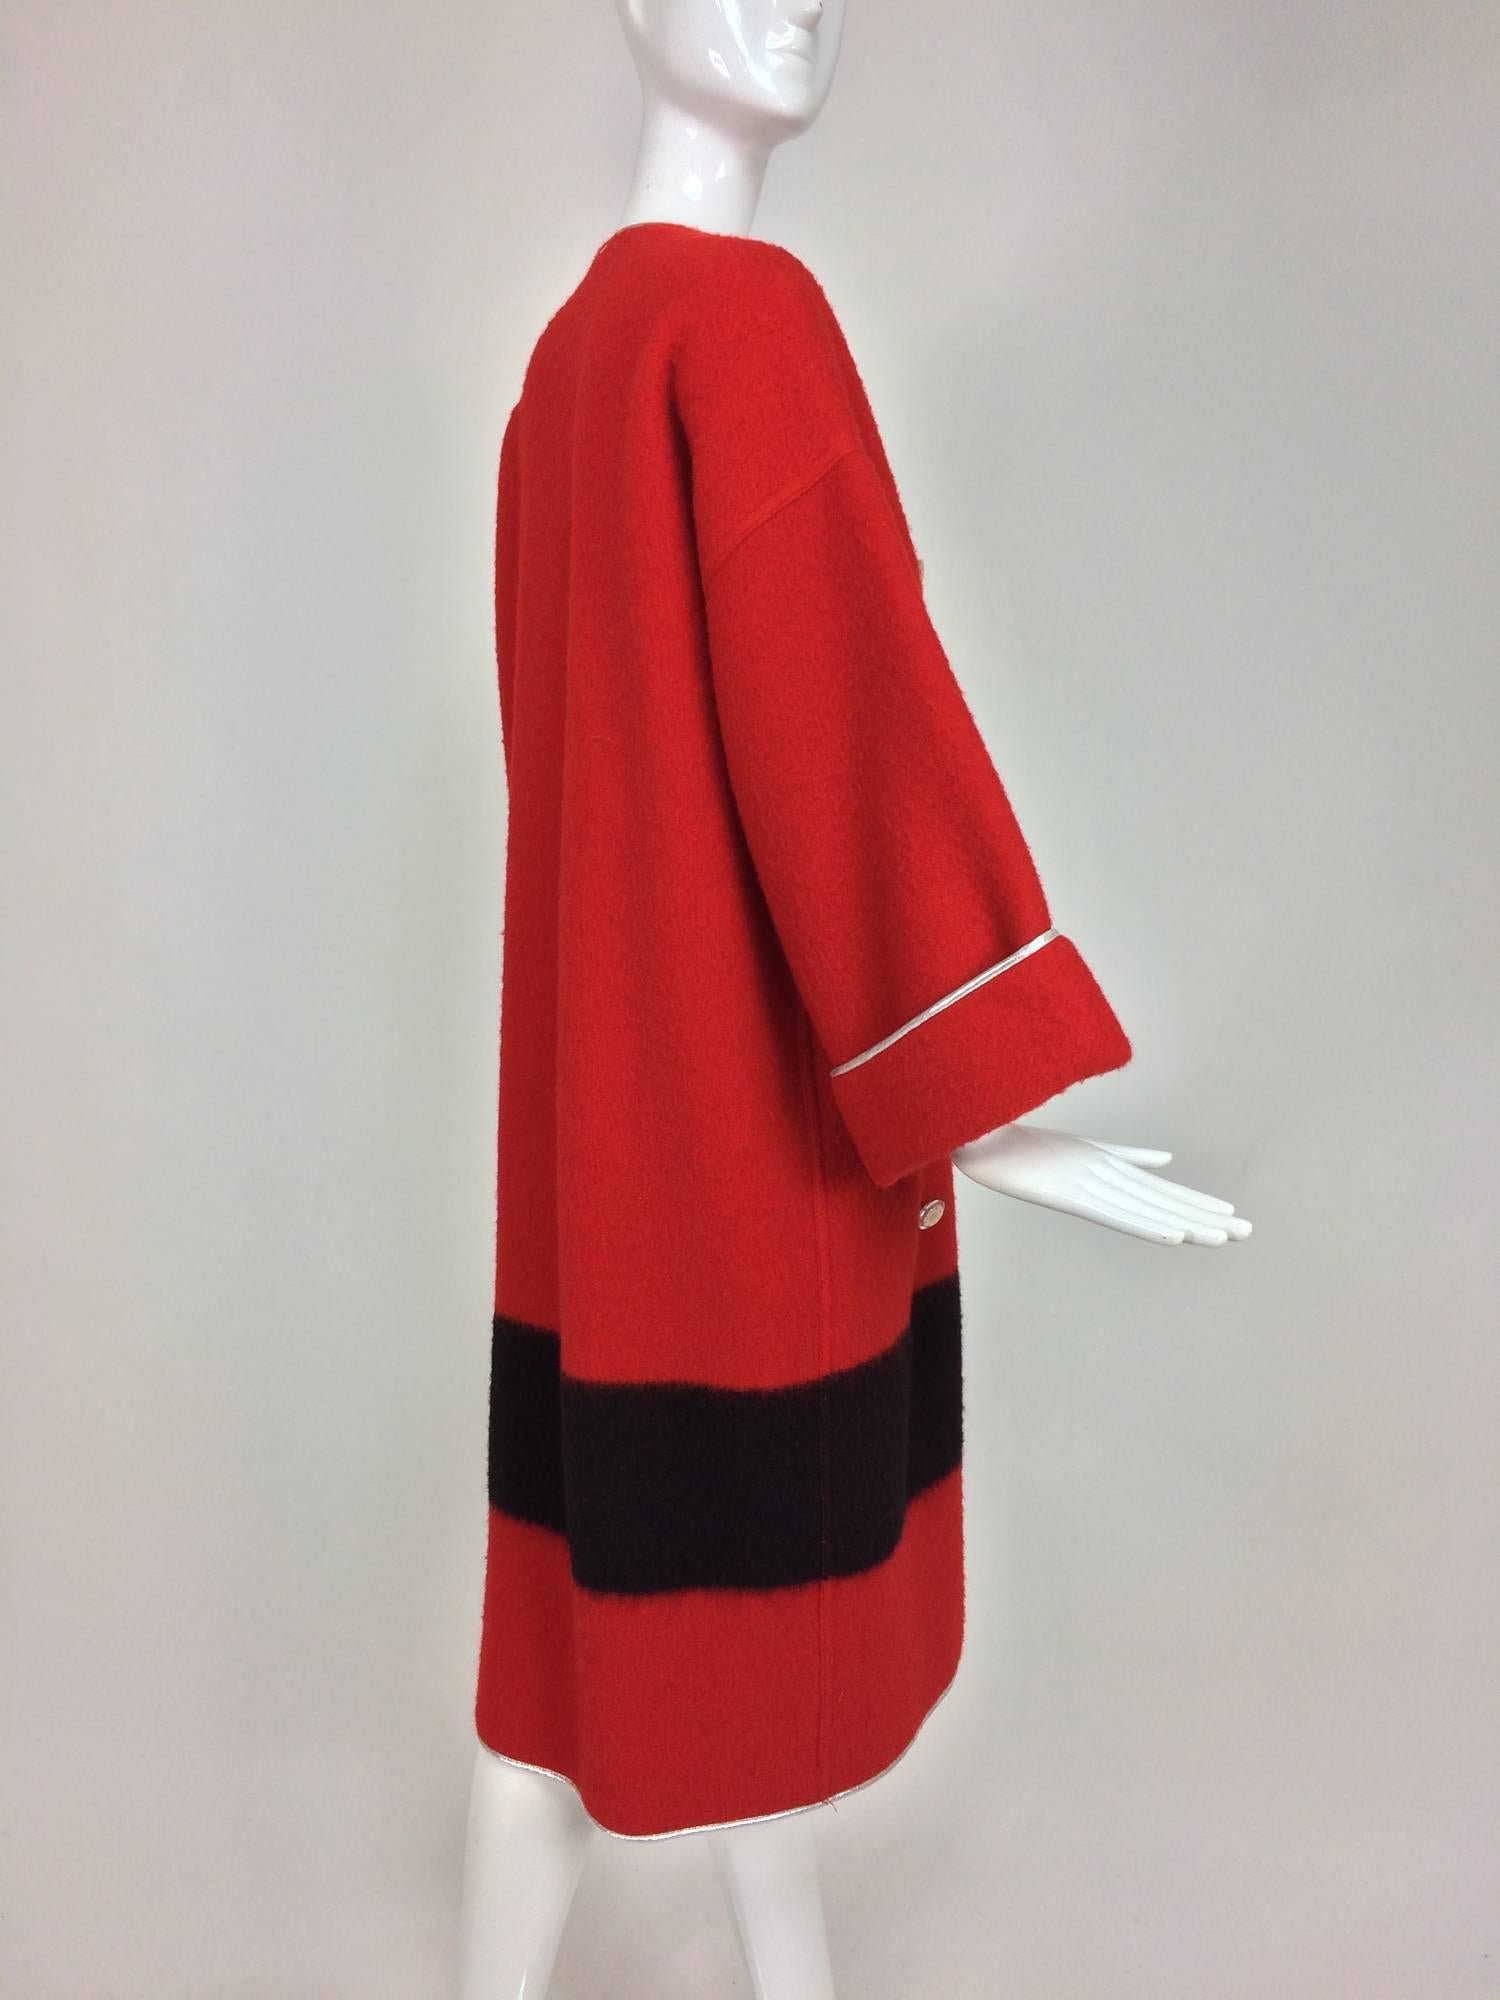 Geoffrey Beene red and black wool blanket coat with silver lame trim from the 1970s. Beene was famous for his fabric combinations and this double face wool, this Hudson's Bay style blanket coat, combines the country style wool with delicate silver